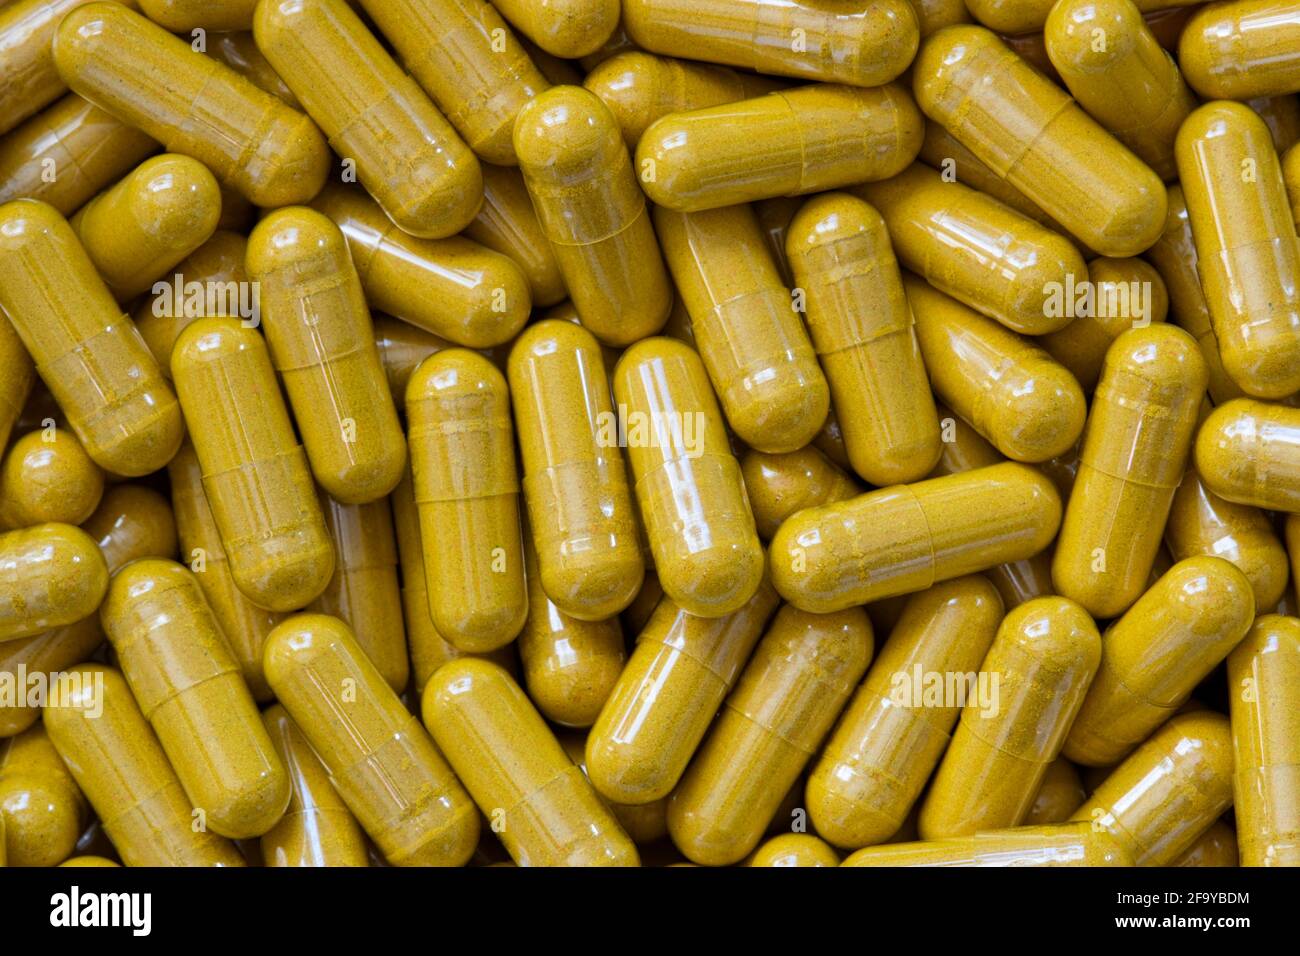 Turmeric Curcumin supplement capsules scattered loosely, close up macro flat lay image. Sold as an herbal anti-inflammatory remedy. Stock Photo